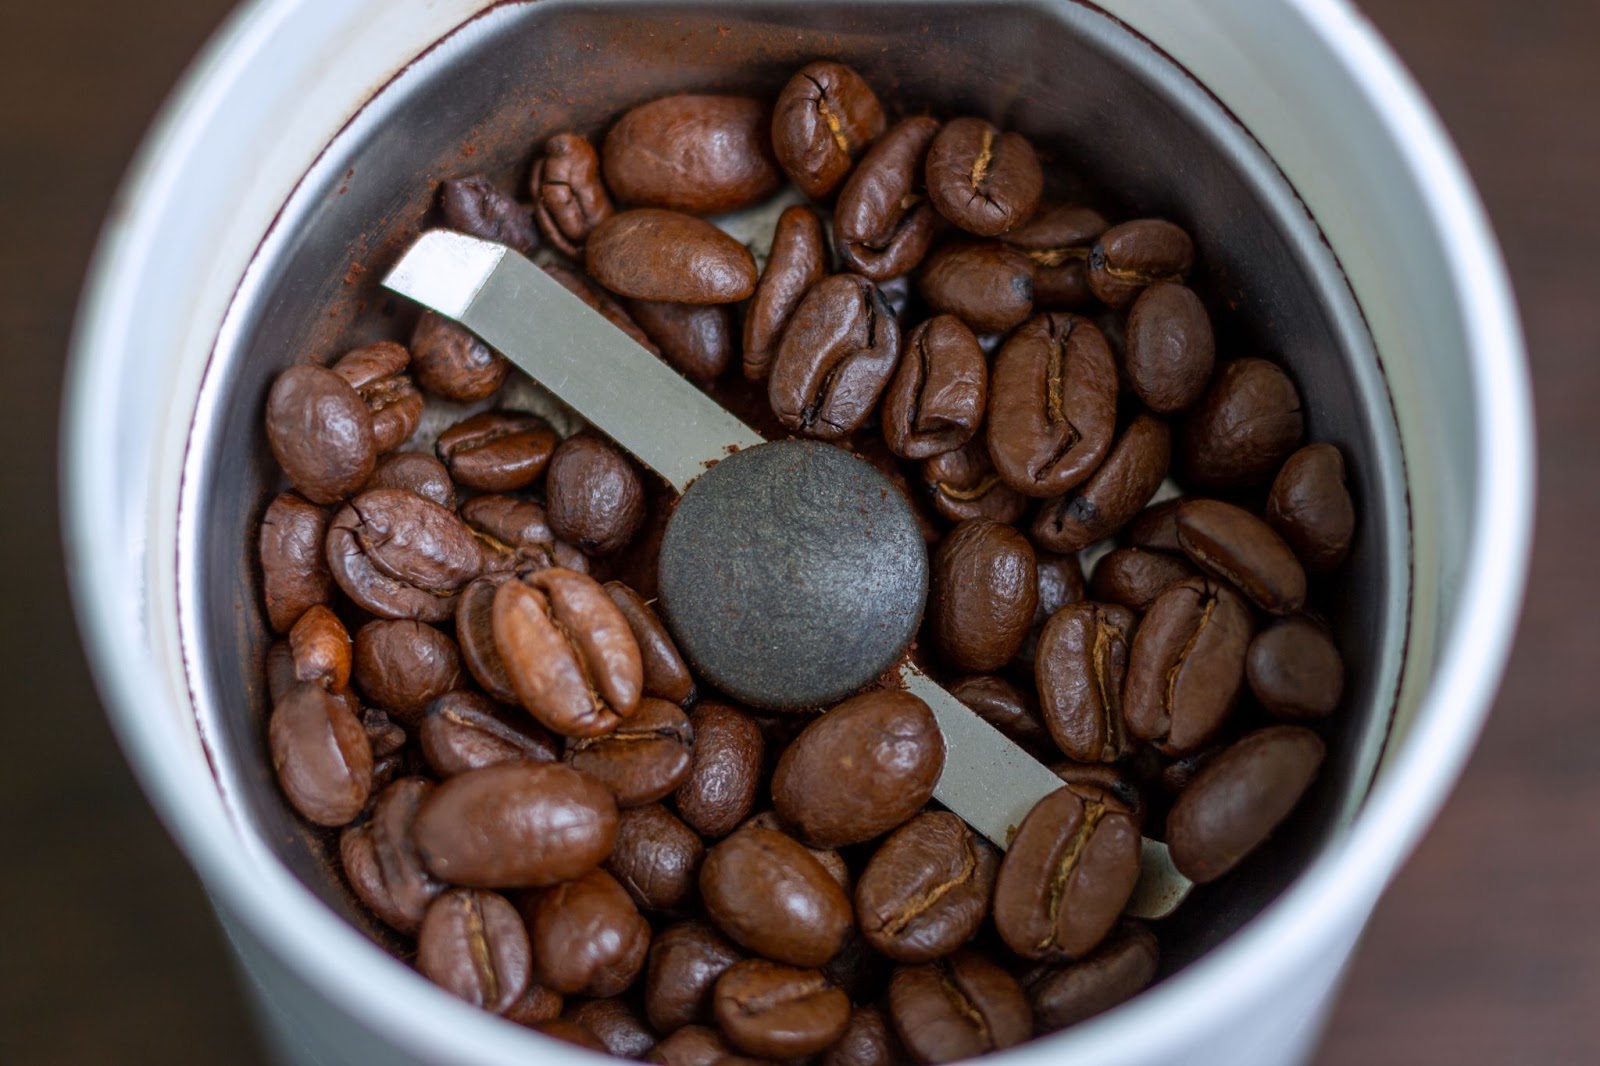 Burr vs. Blade Grinders: Which Is the Best for Coffee?